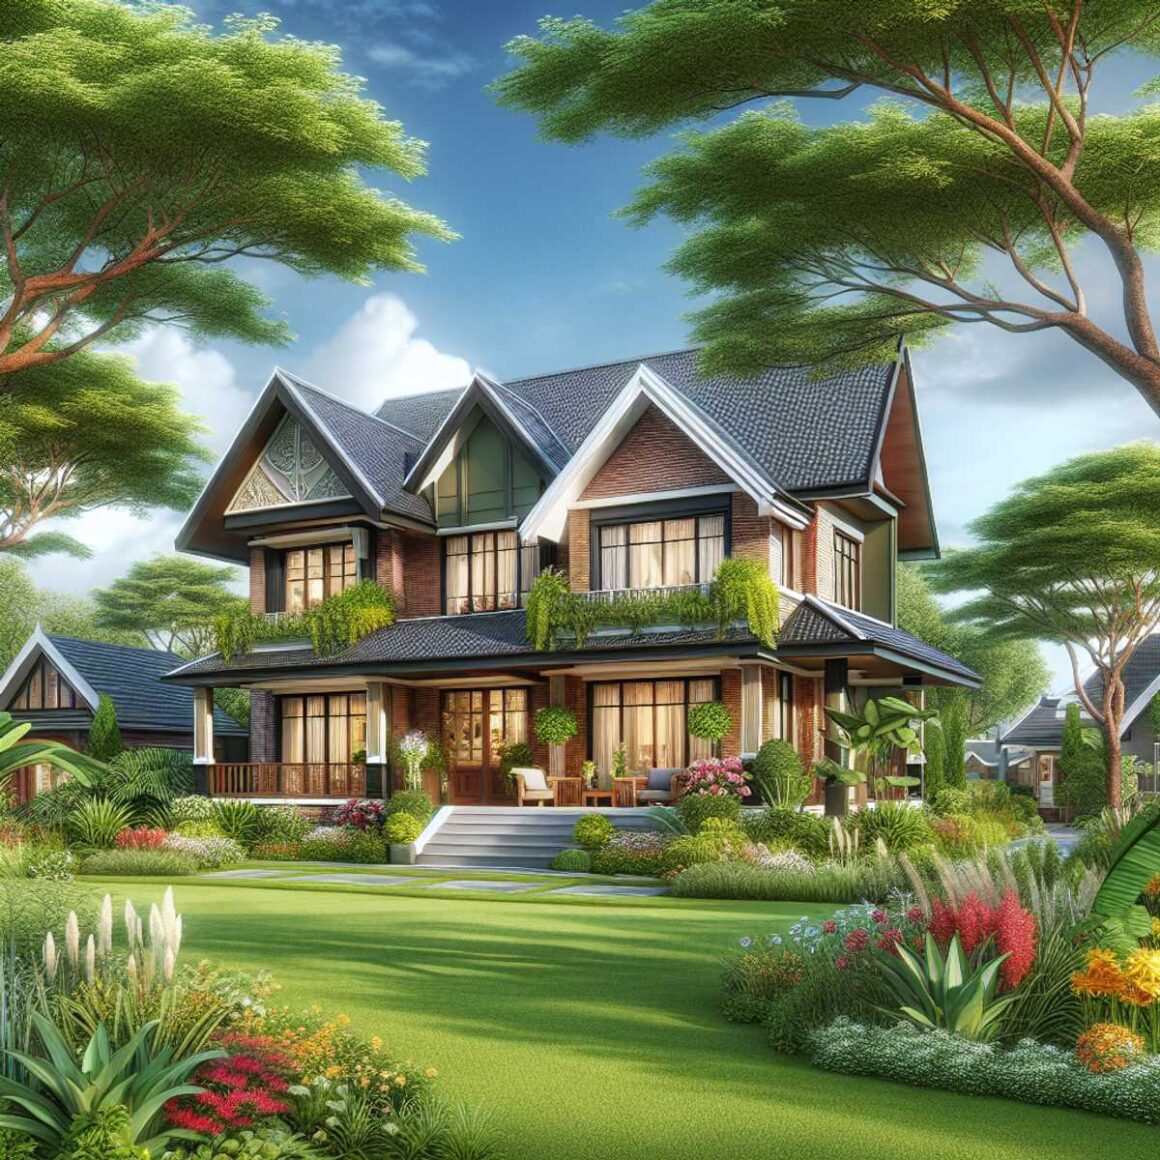 Beautiful two-story house surrounded by lush greenery, trees, and colorful flowers.